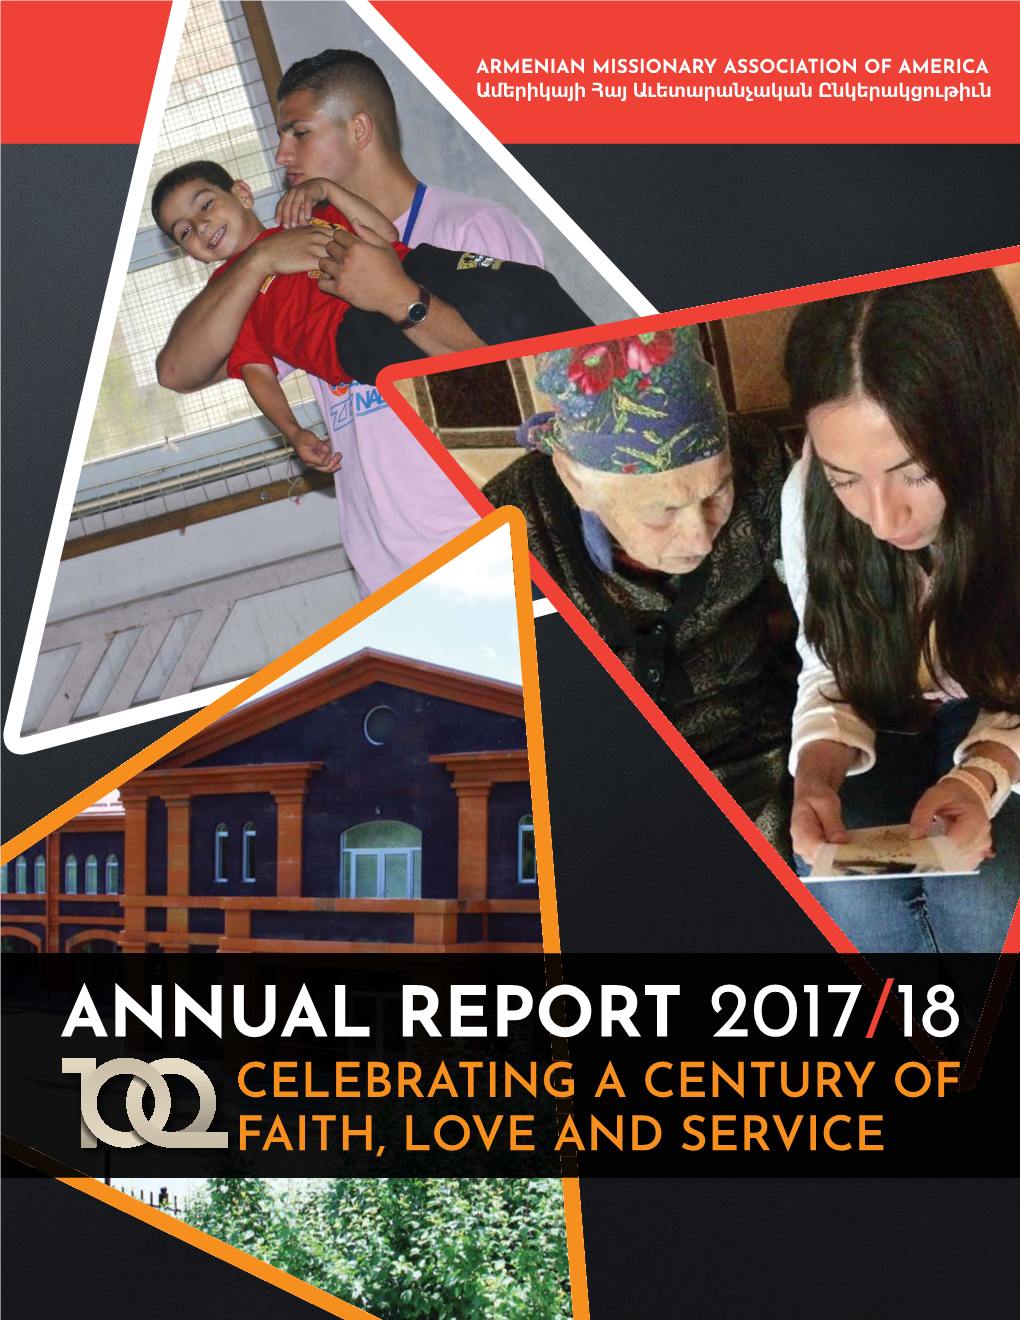 Annual Report 2017/18 Celebrating a Century of Faith, Love and Service 1918 2018 Foreword